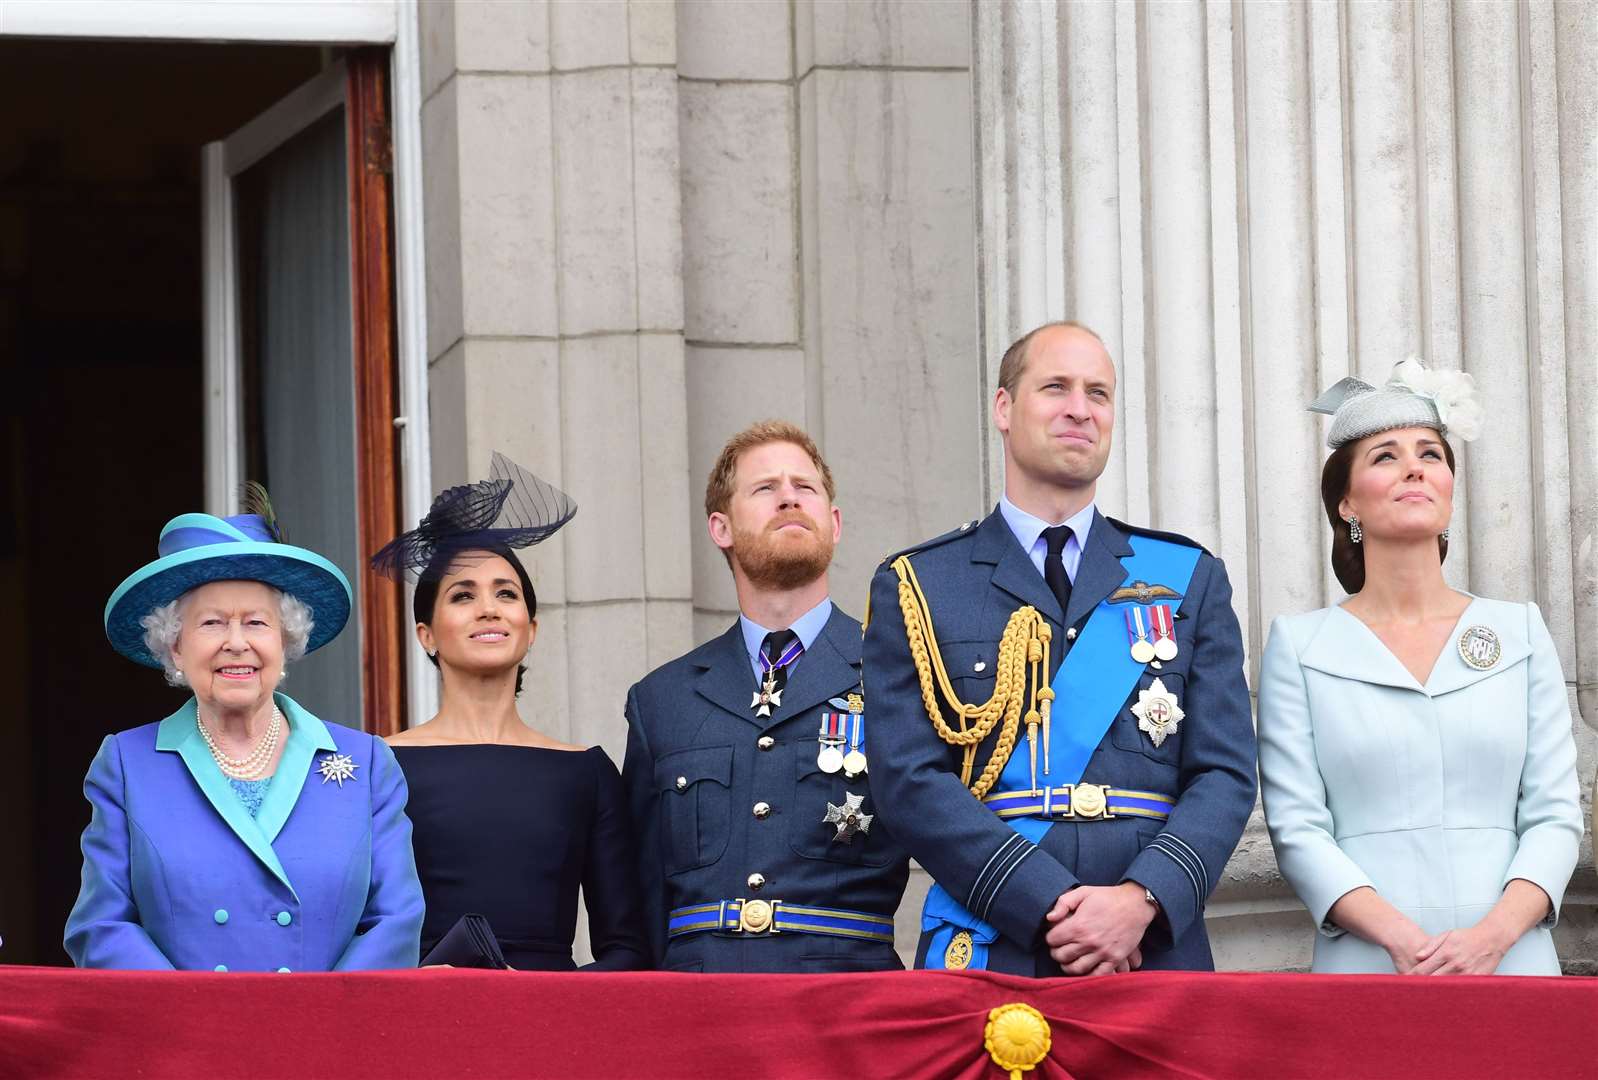 The Duke of Sussex said he felt betrayed by his brother and Buckingham Palace (Paul Grover/Daily Telegraph/PA)